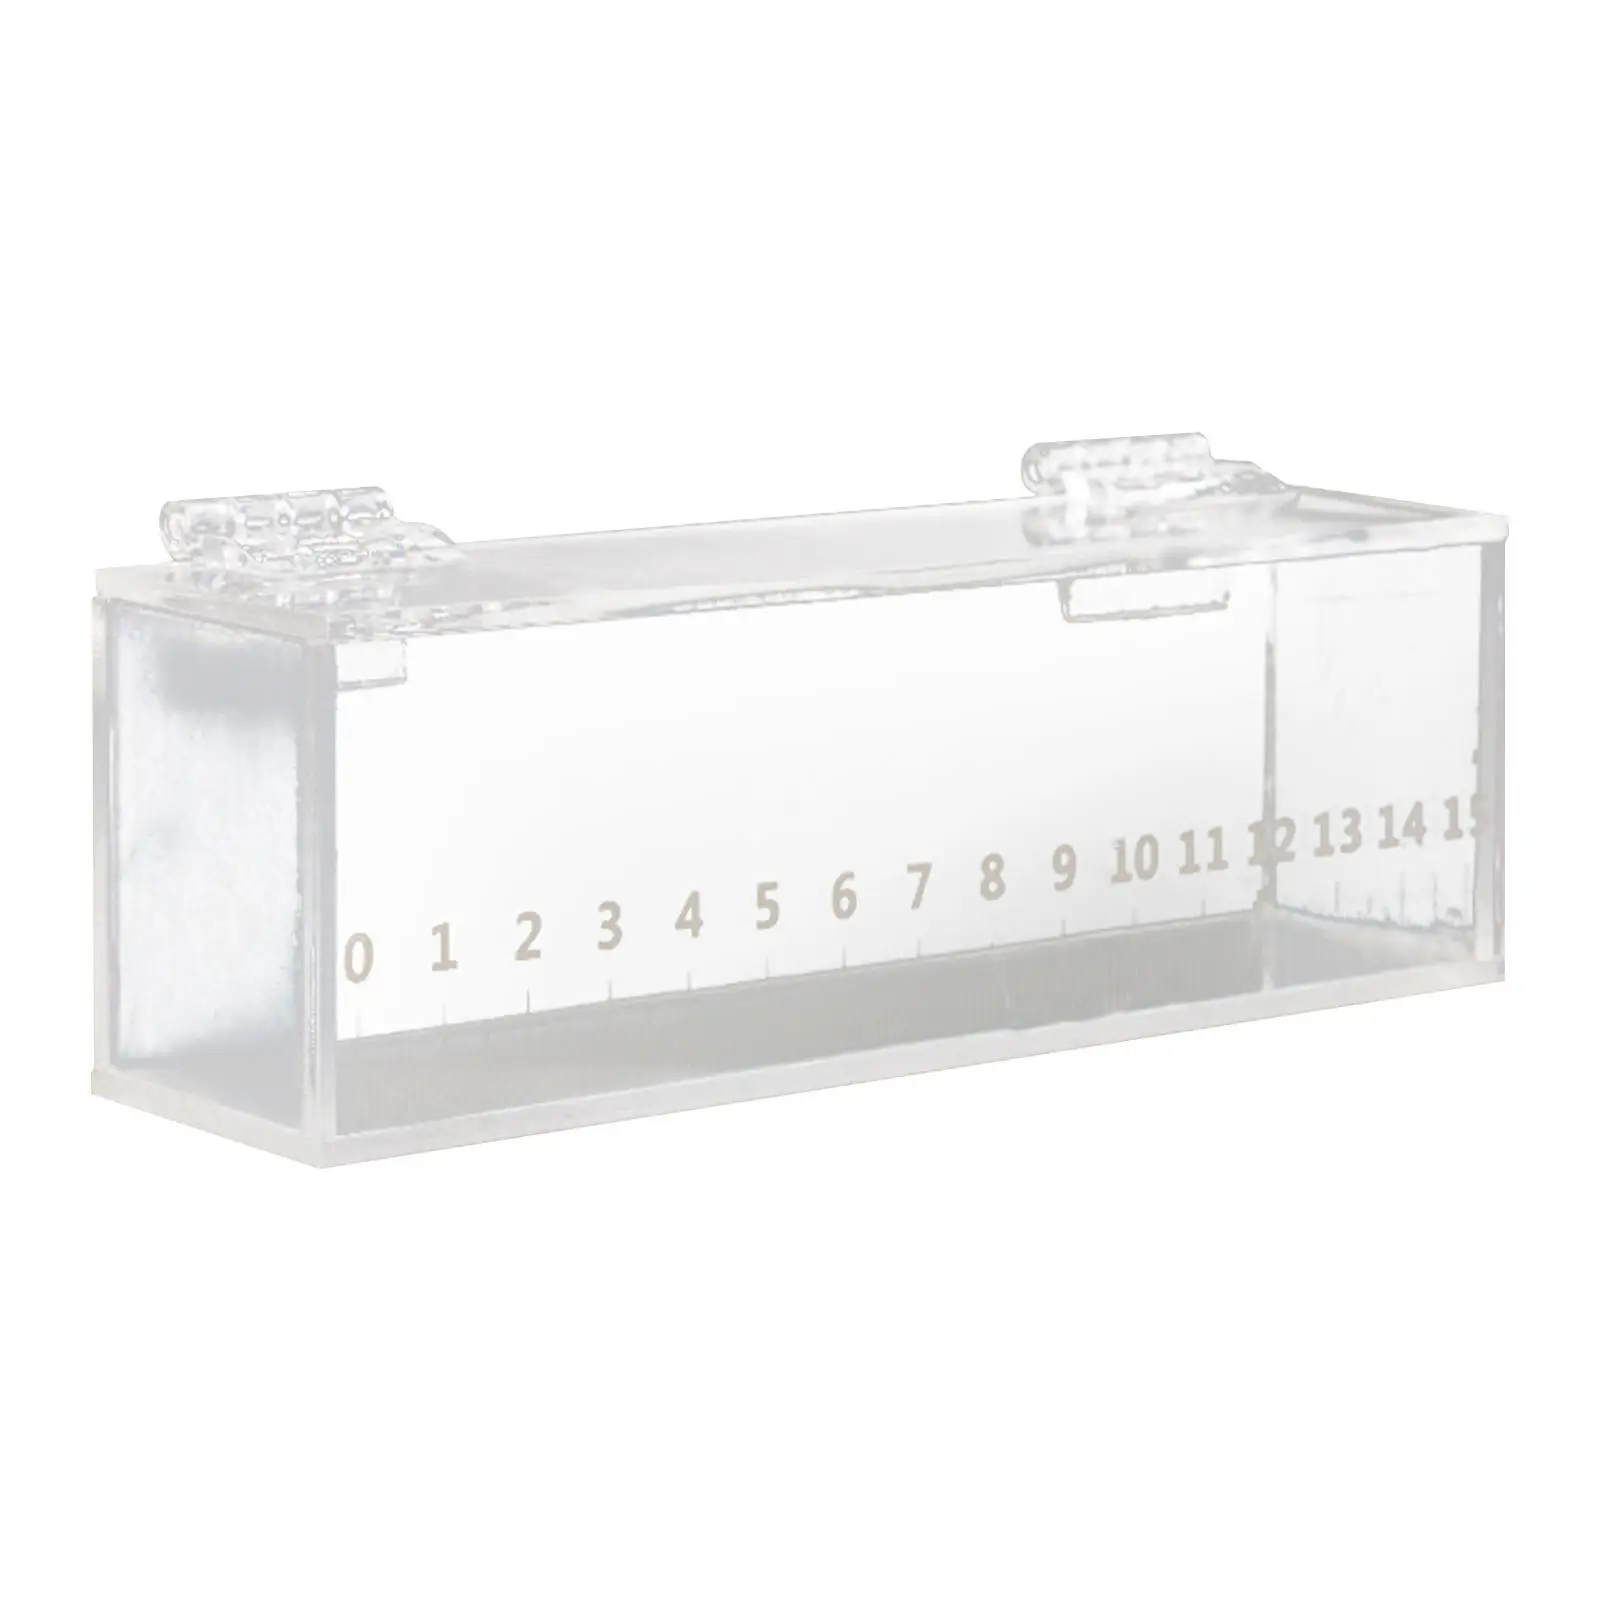 Fish Viewing Box Acrylic Fishing Accessories Portable with Lid Transparent Fishing Photo Tank Hatching Boxes Fish Breeding Tanks